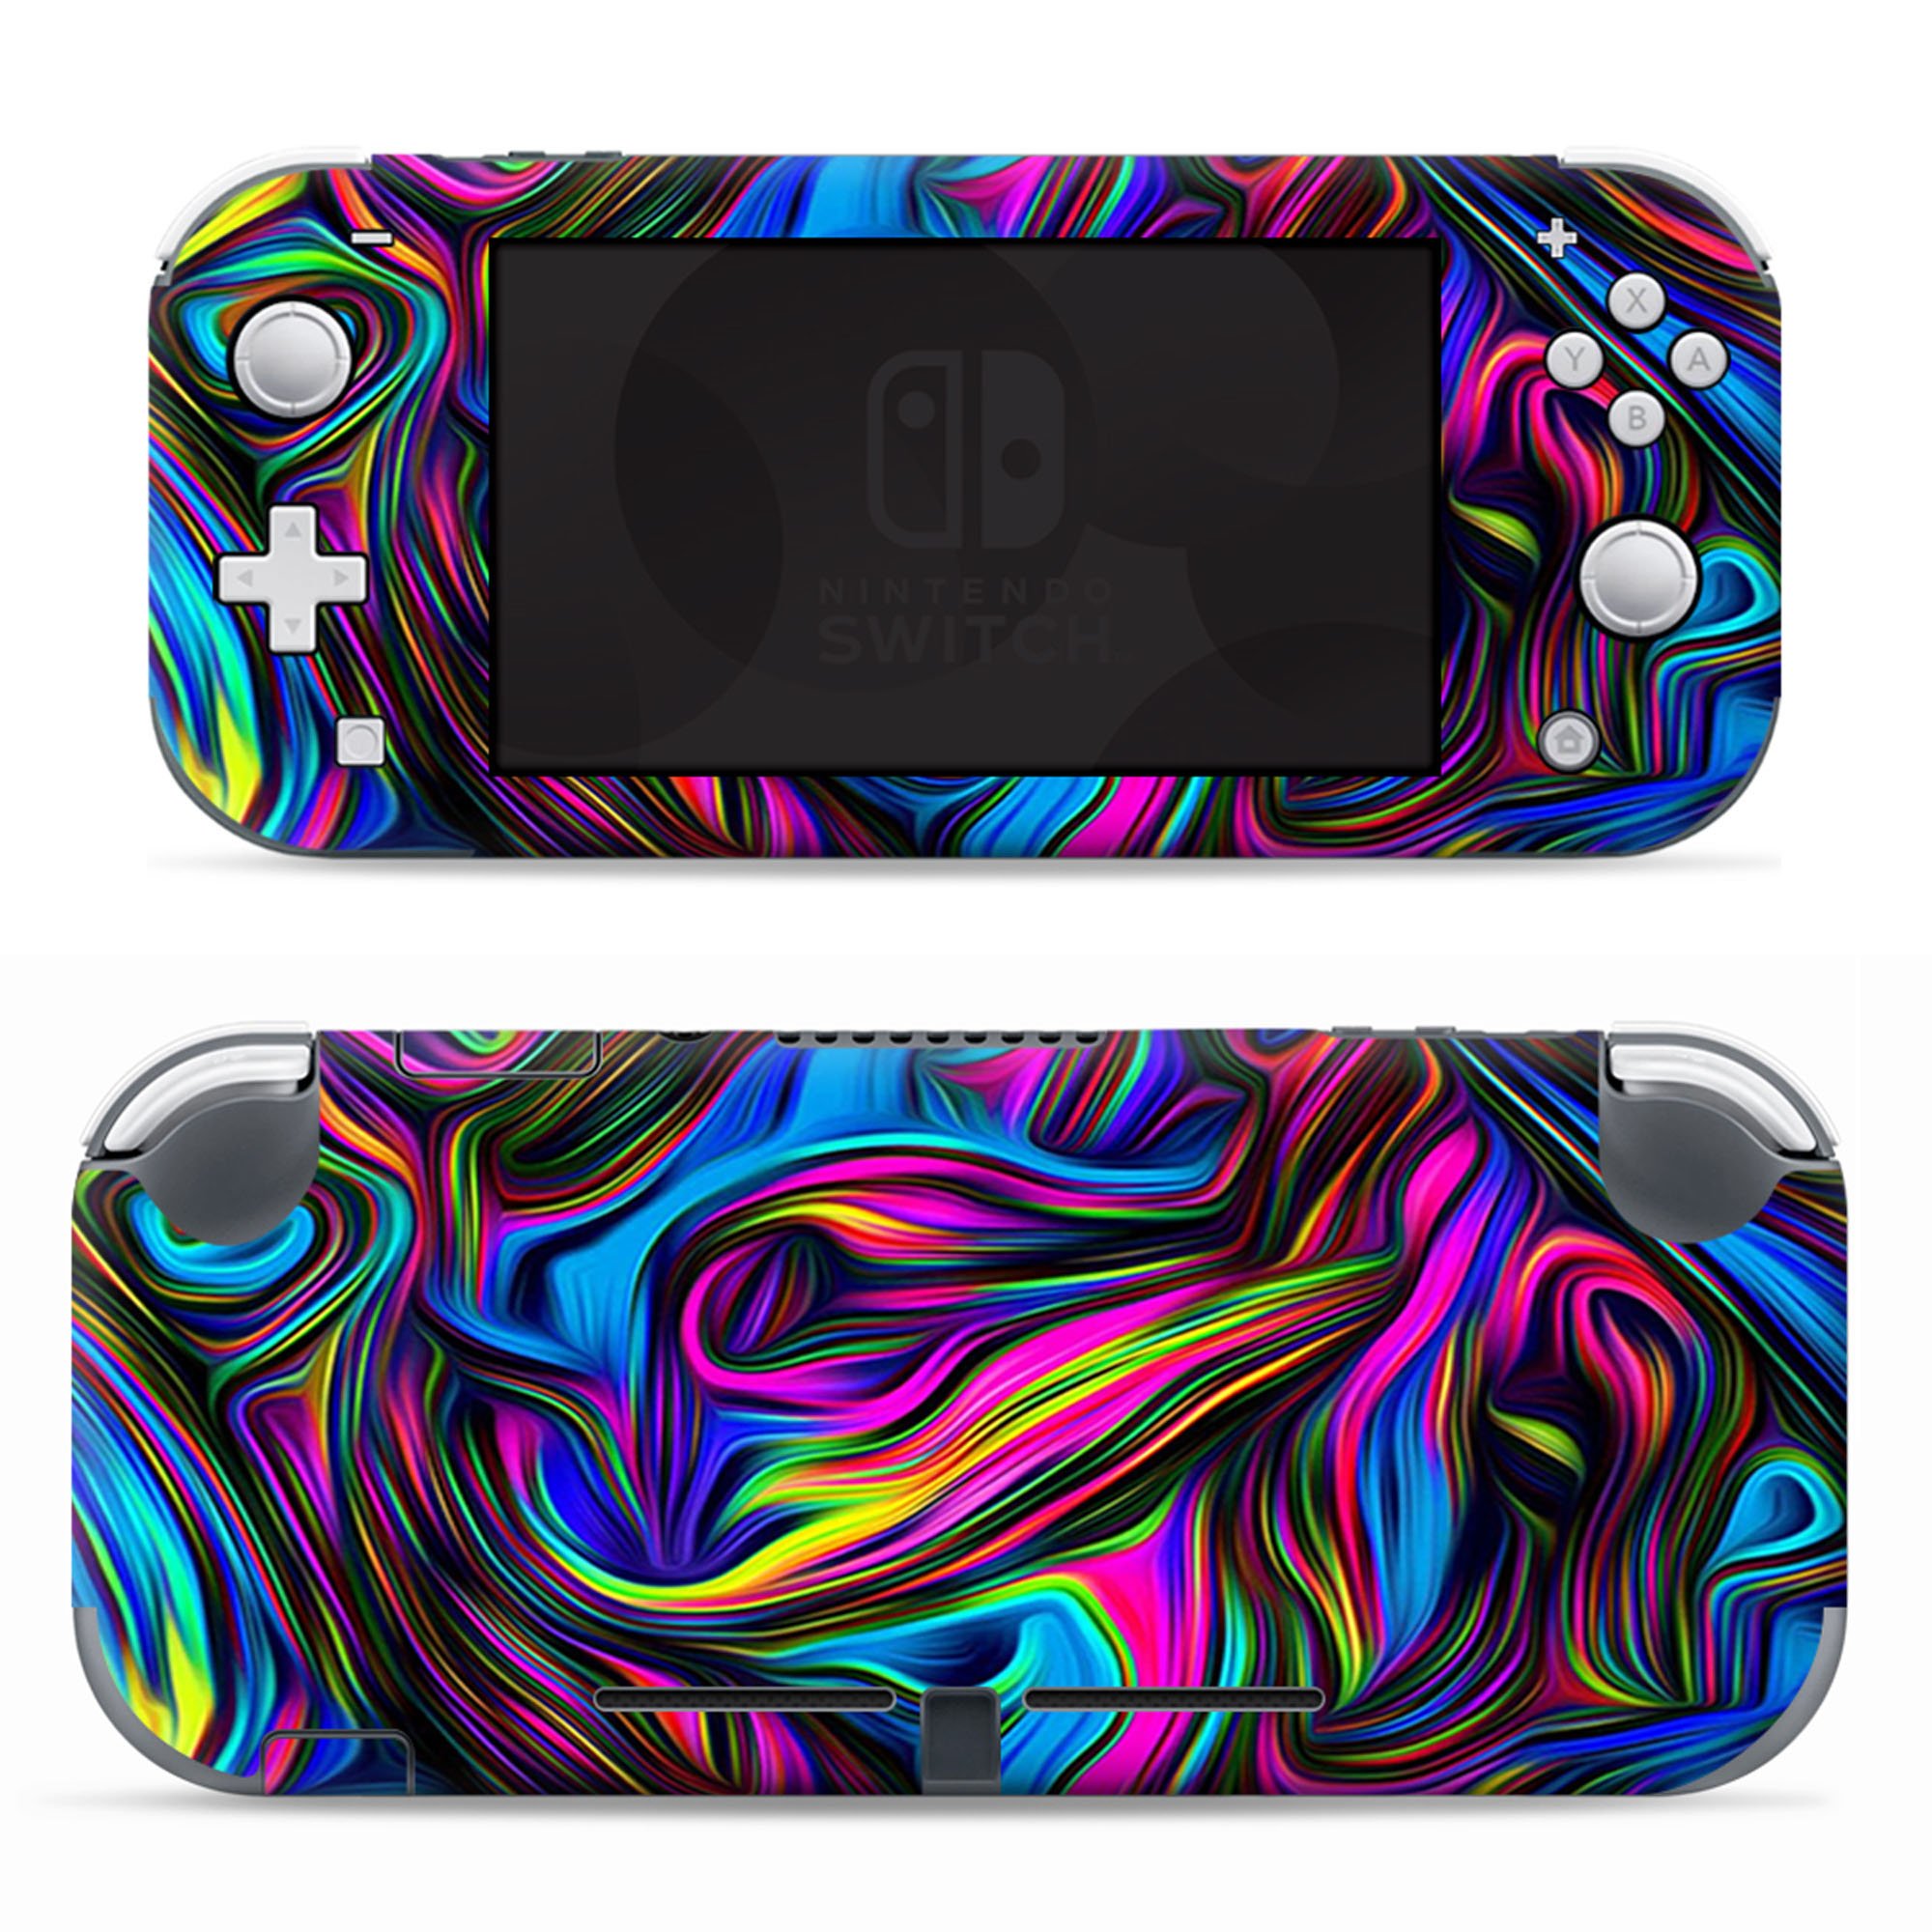 Nintendo Switch Lite Skins Decals Vinyl Wrap  - decal stickers skins cover -Neon Color Swirl Glass - image 1 of 4